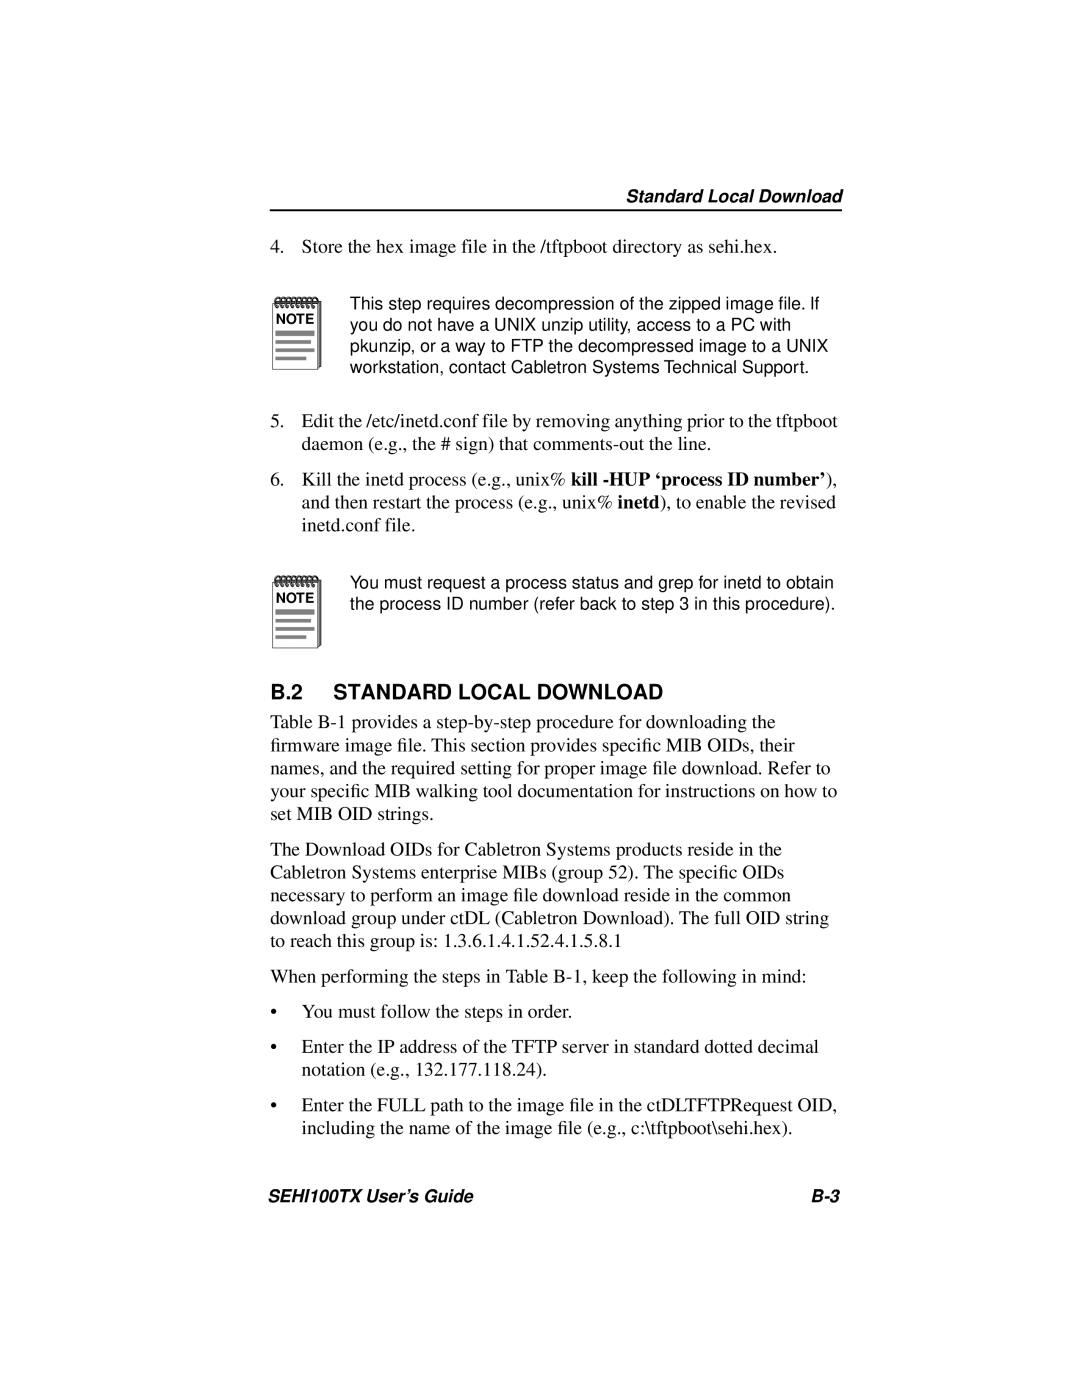 Cabletron Systems SEHI100TX-22 manual B.2 STANDARD LOCAL DOWNLOAD 